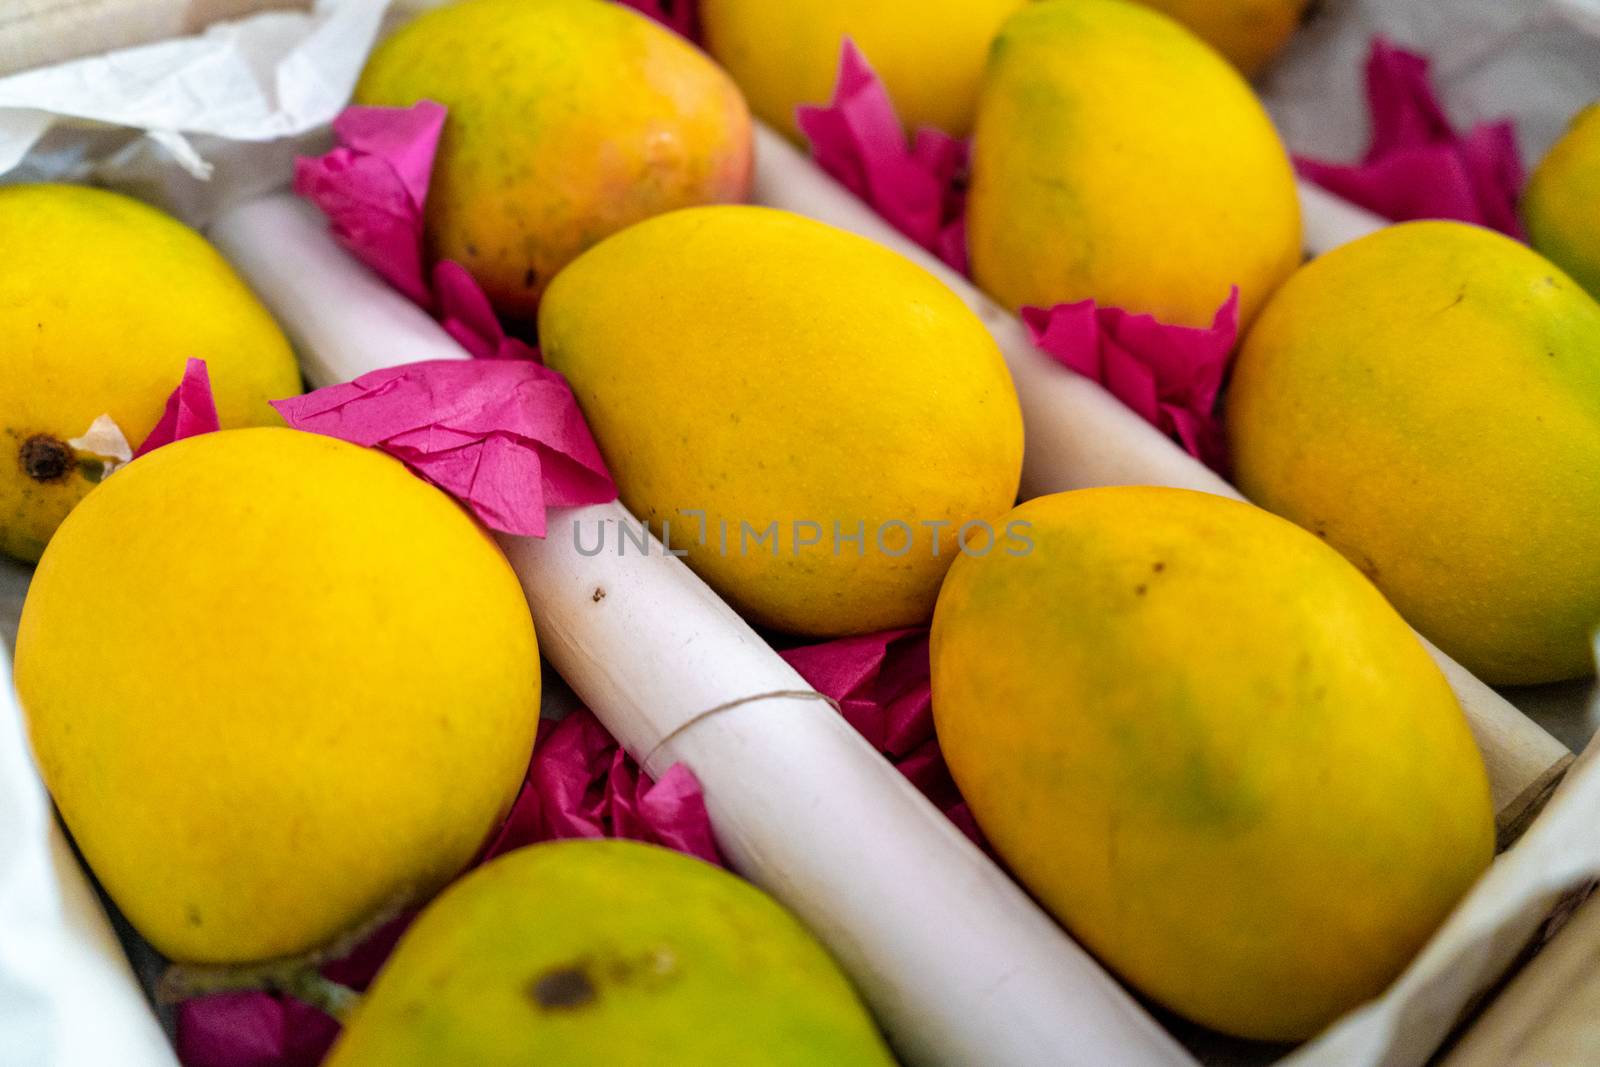 shot of ripe yellow green mangoes placed on white paper and covered with think pink butter paper ready to sell and serve by Shalinimathur